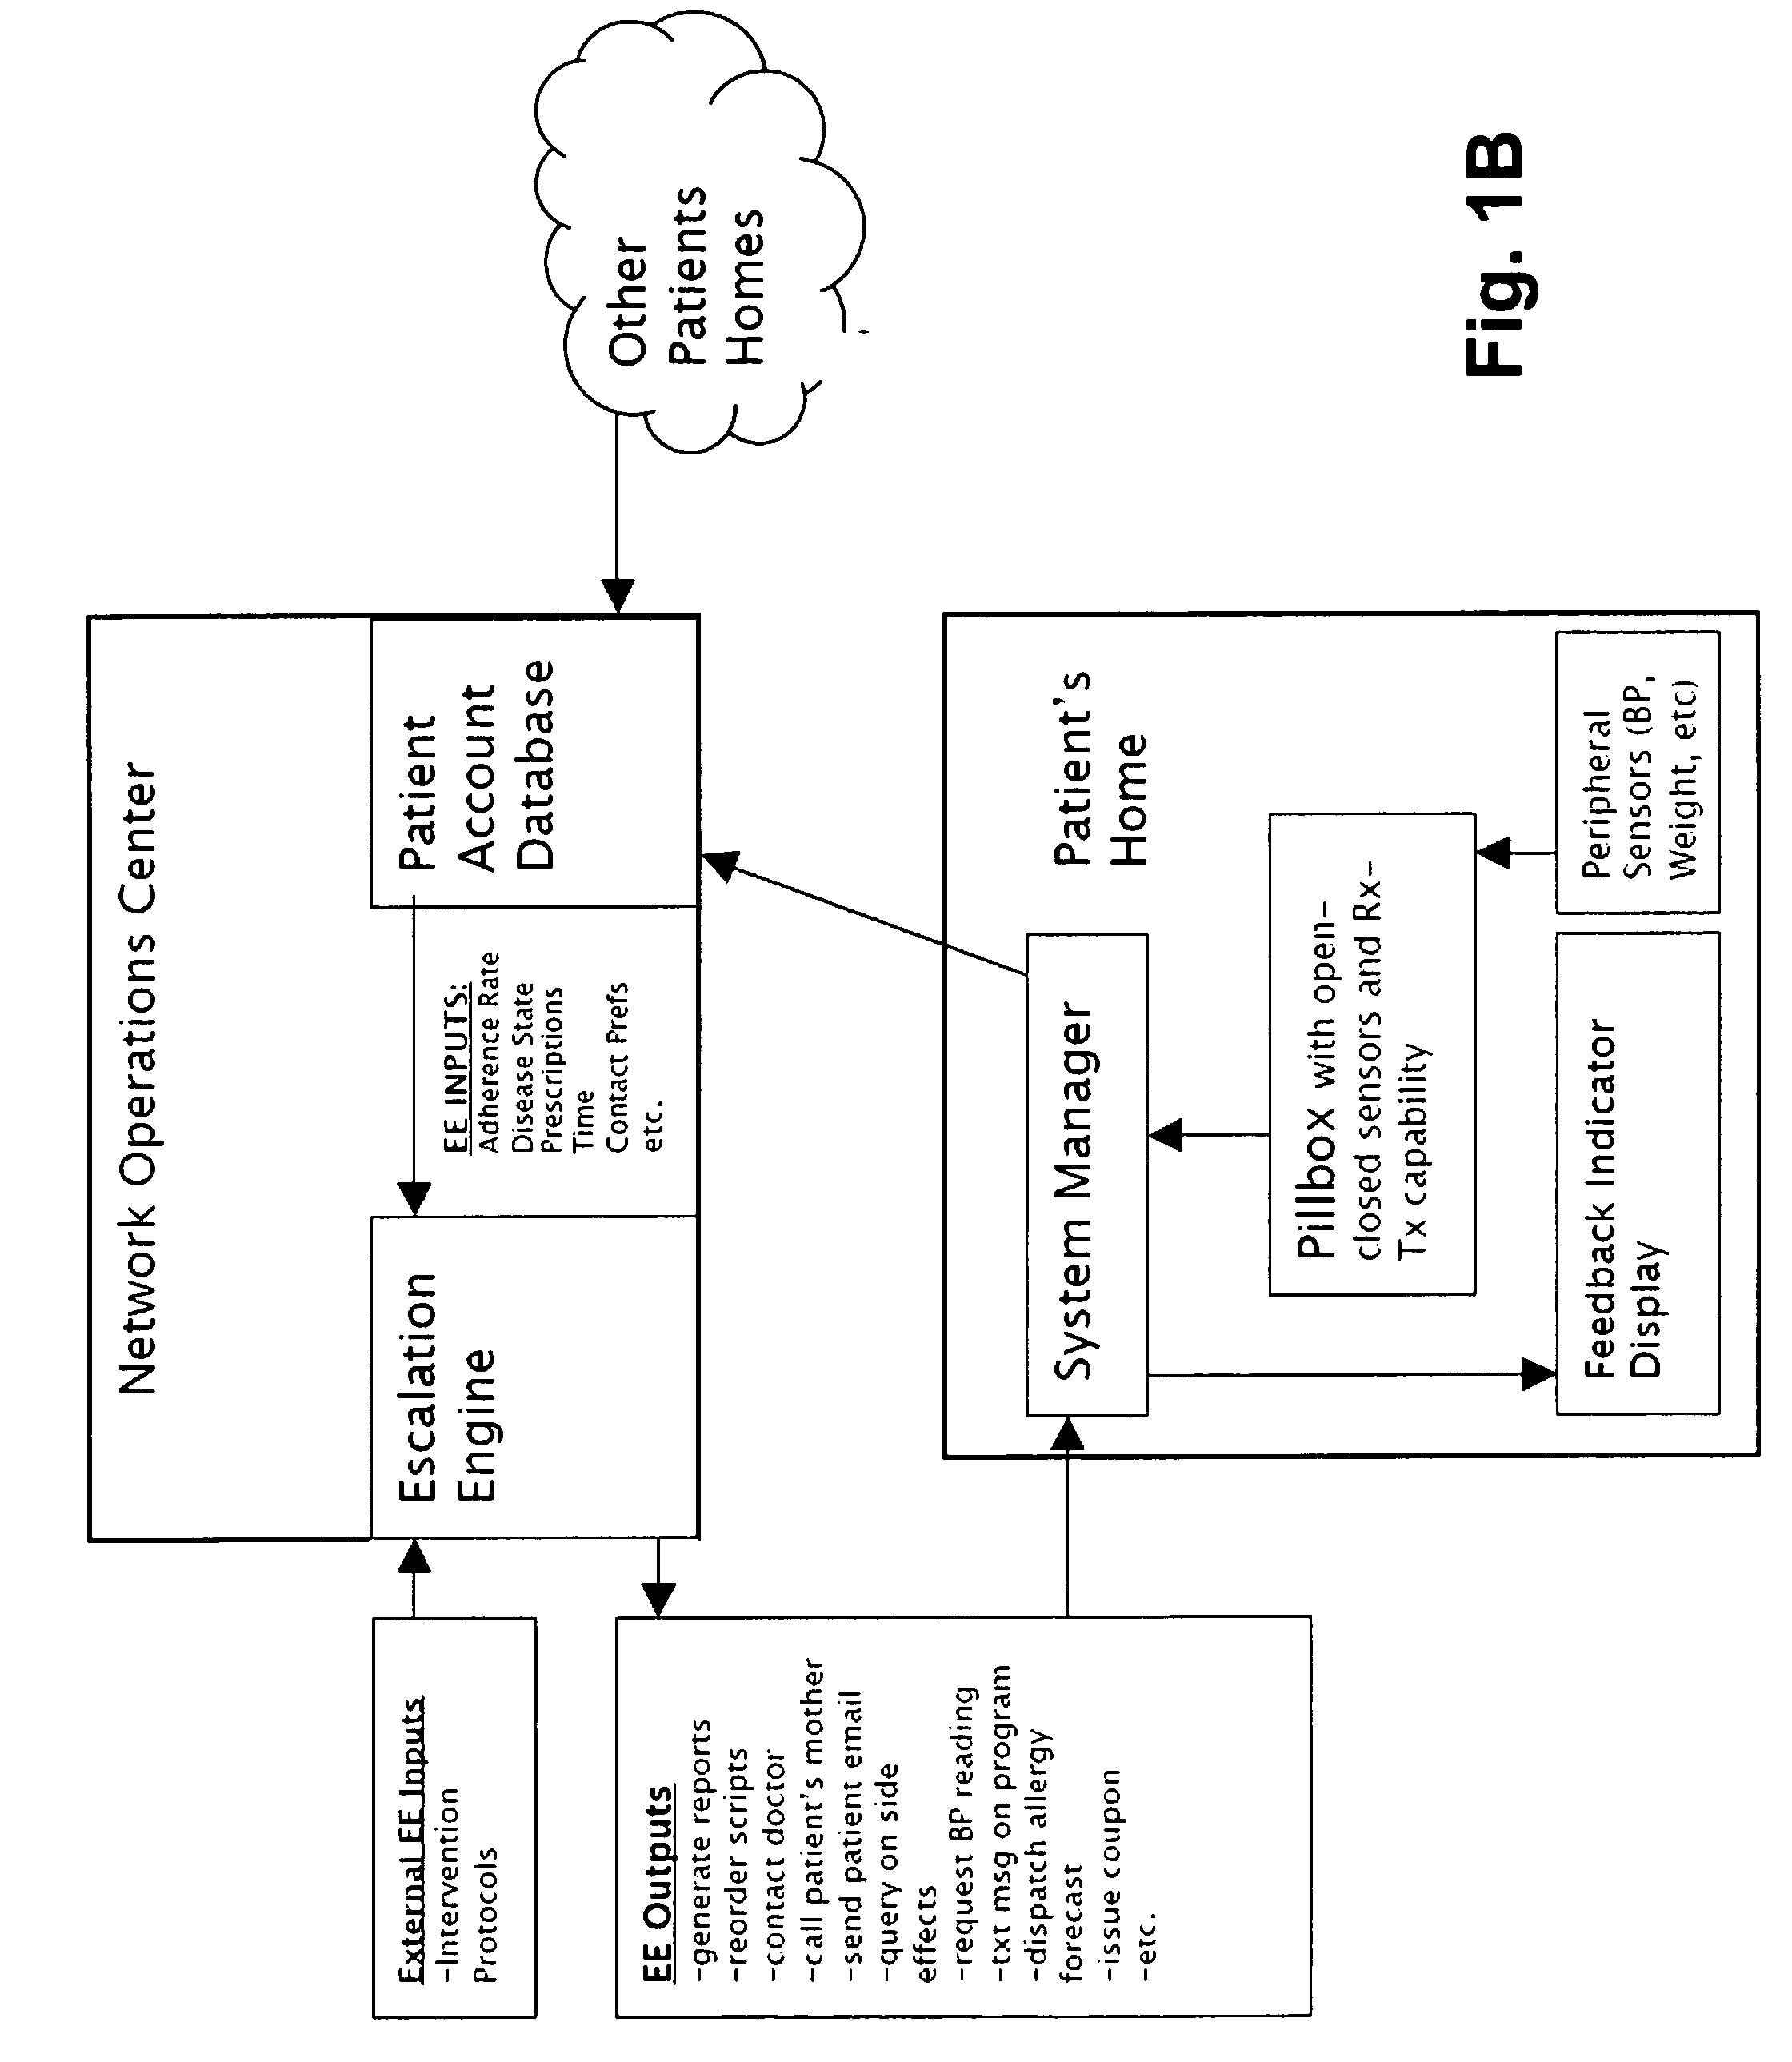 Medication compliance systems, methods and devices with configurable and adaptable escalation engine